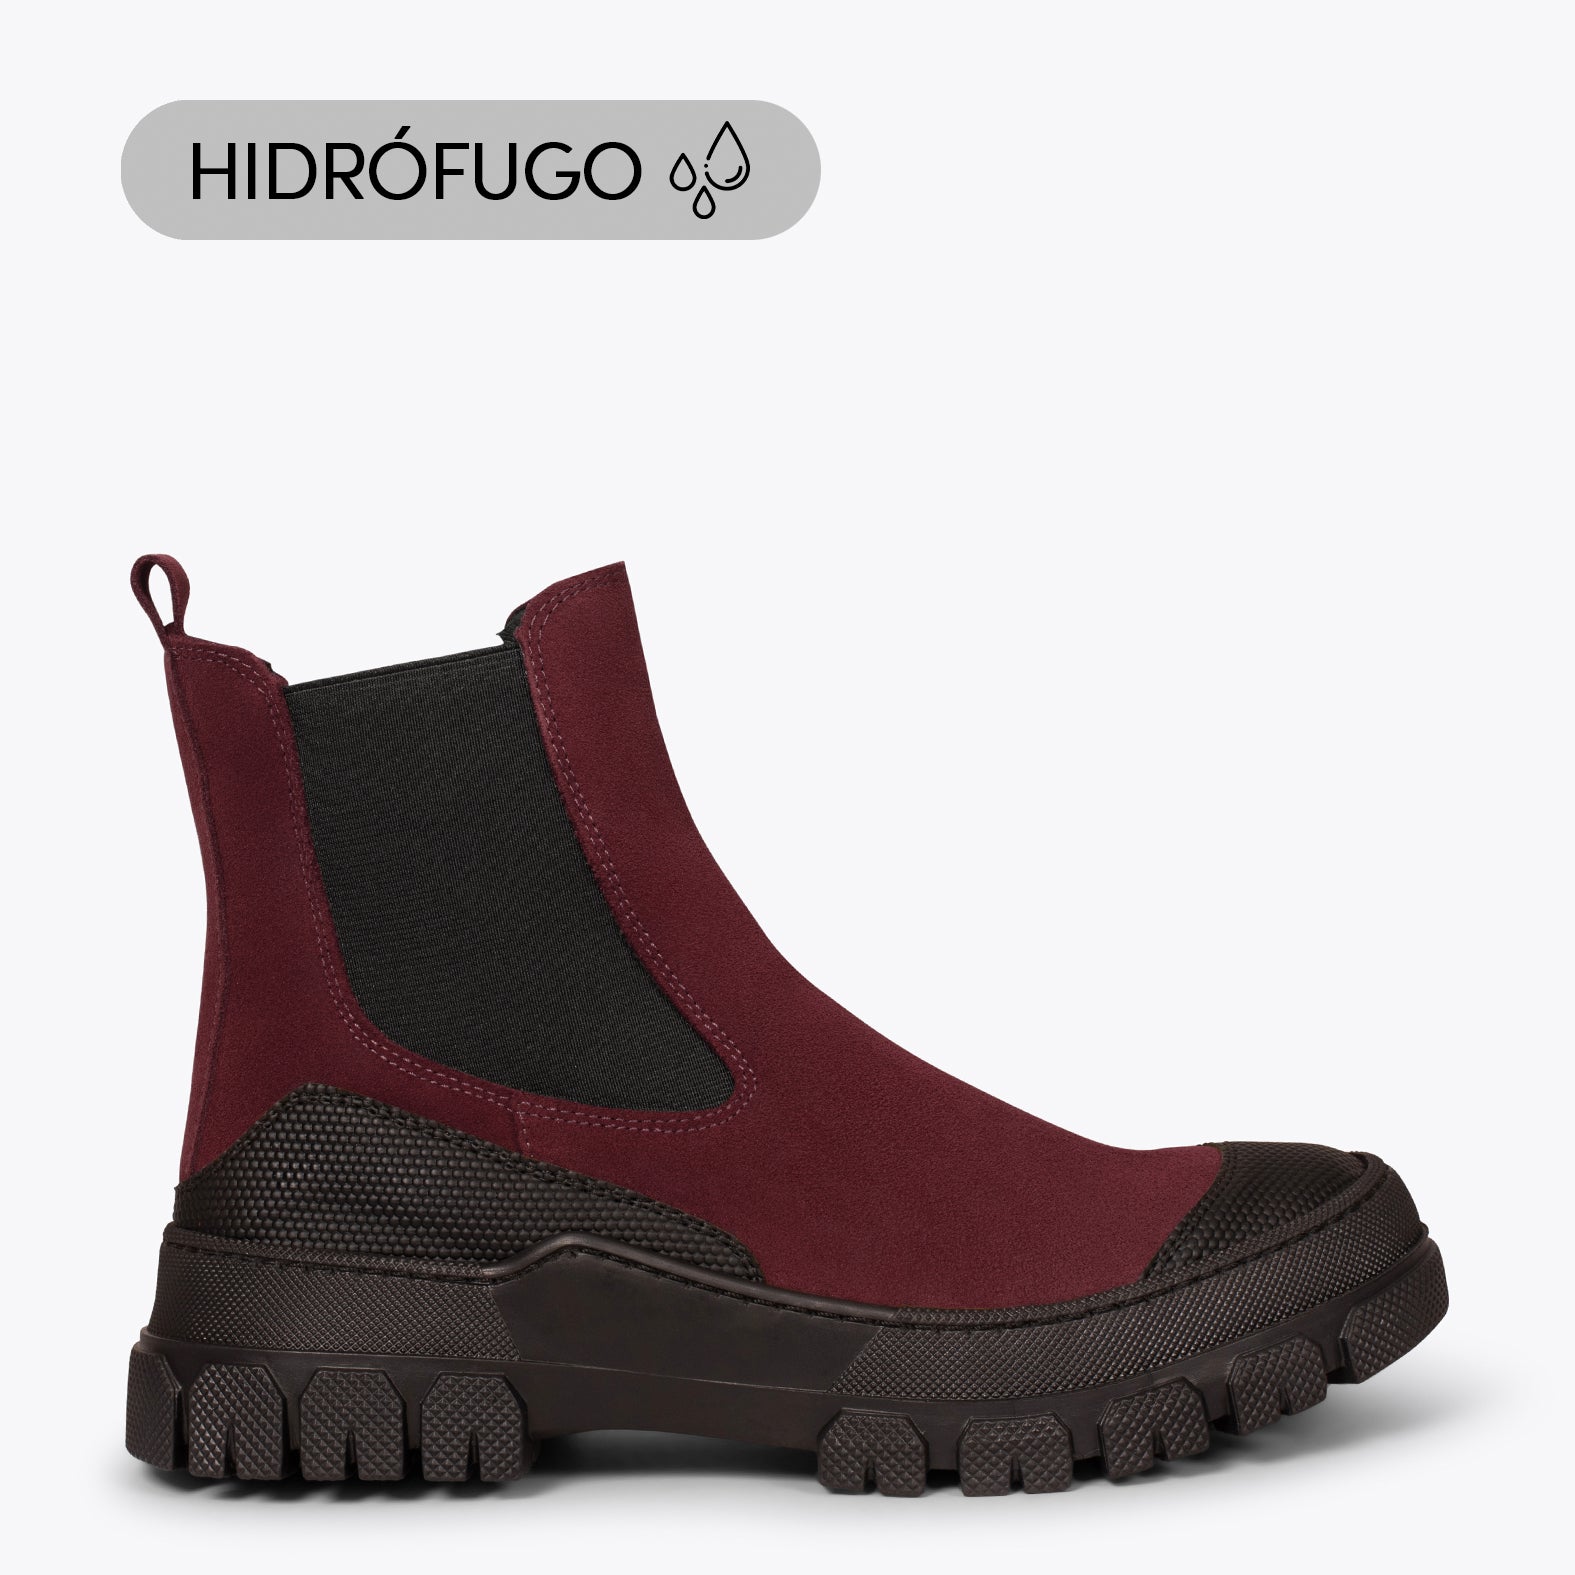 BROOKLYN - BURGUNDY track booties with rubber toe